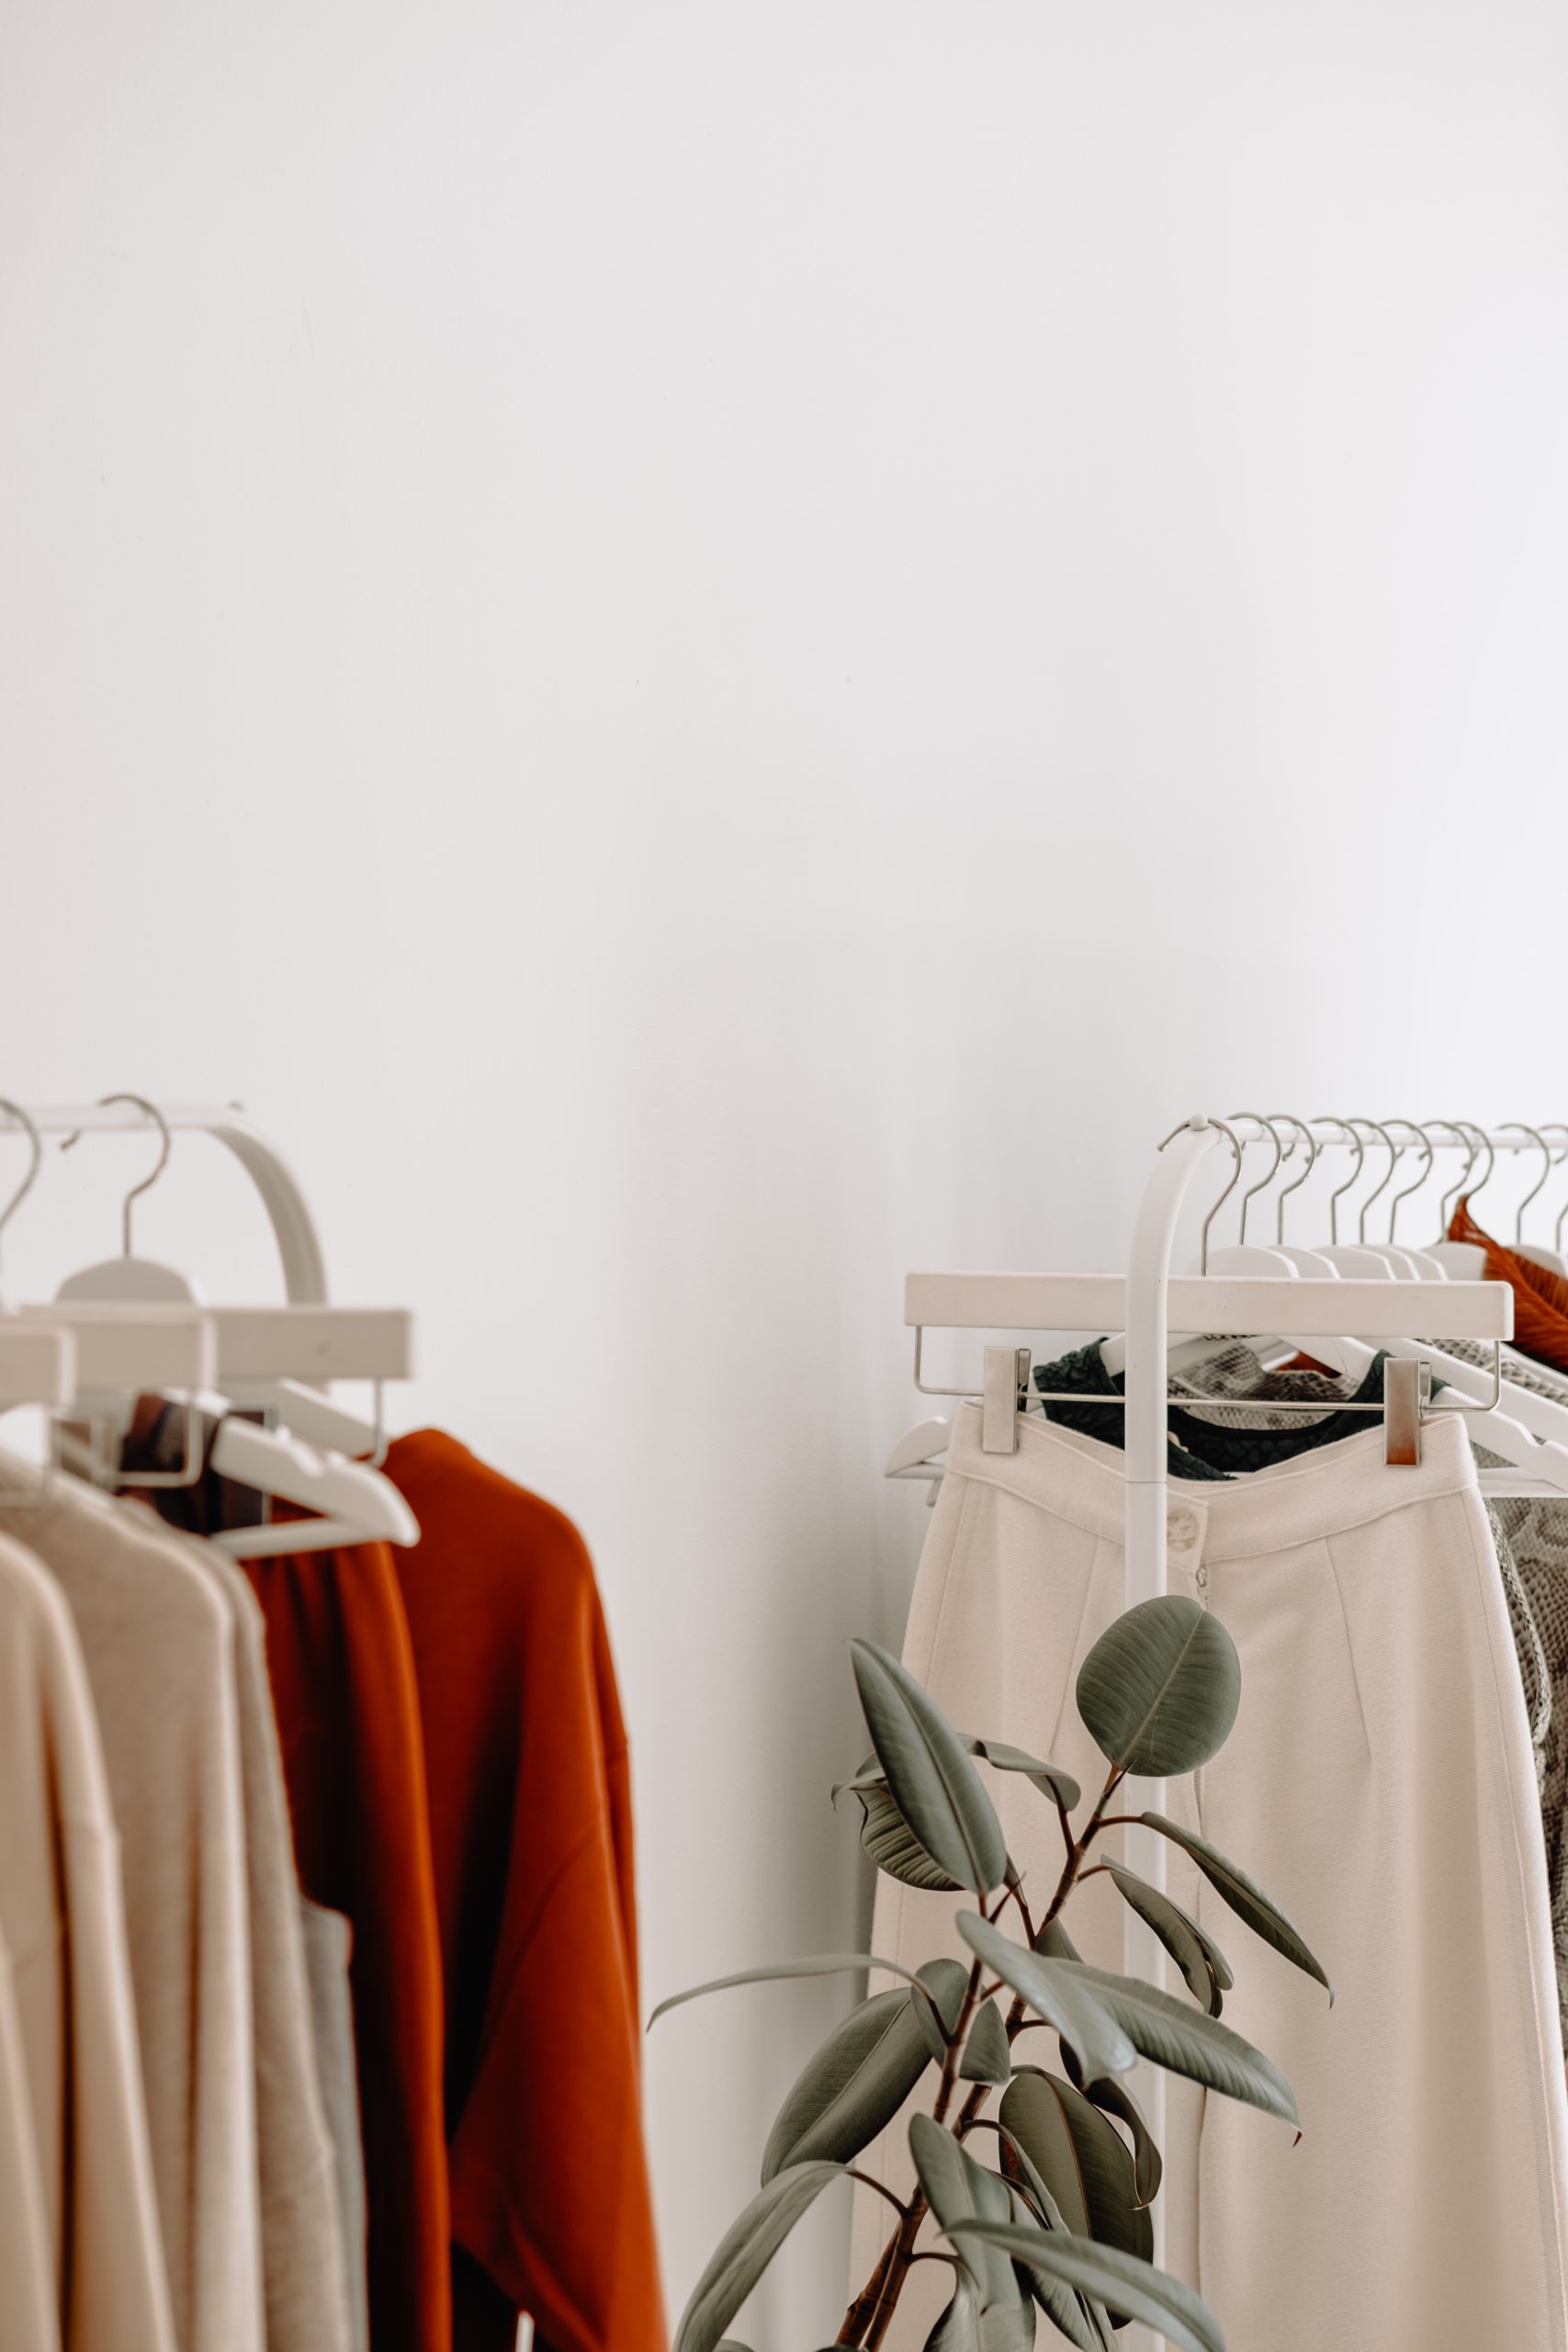 The 5 Benefits of Thrifting and Secondhand Clothing